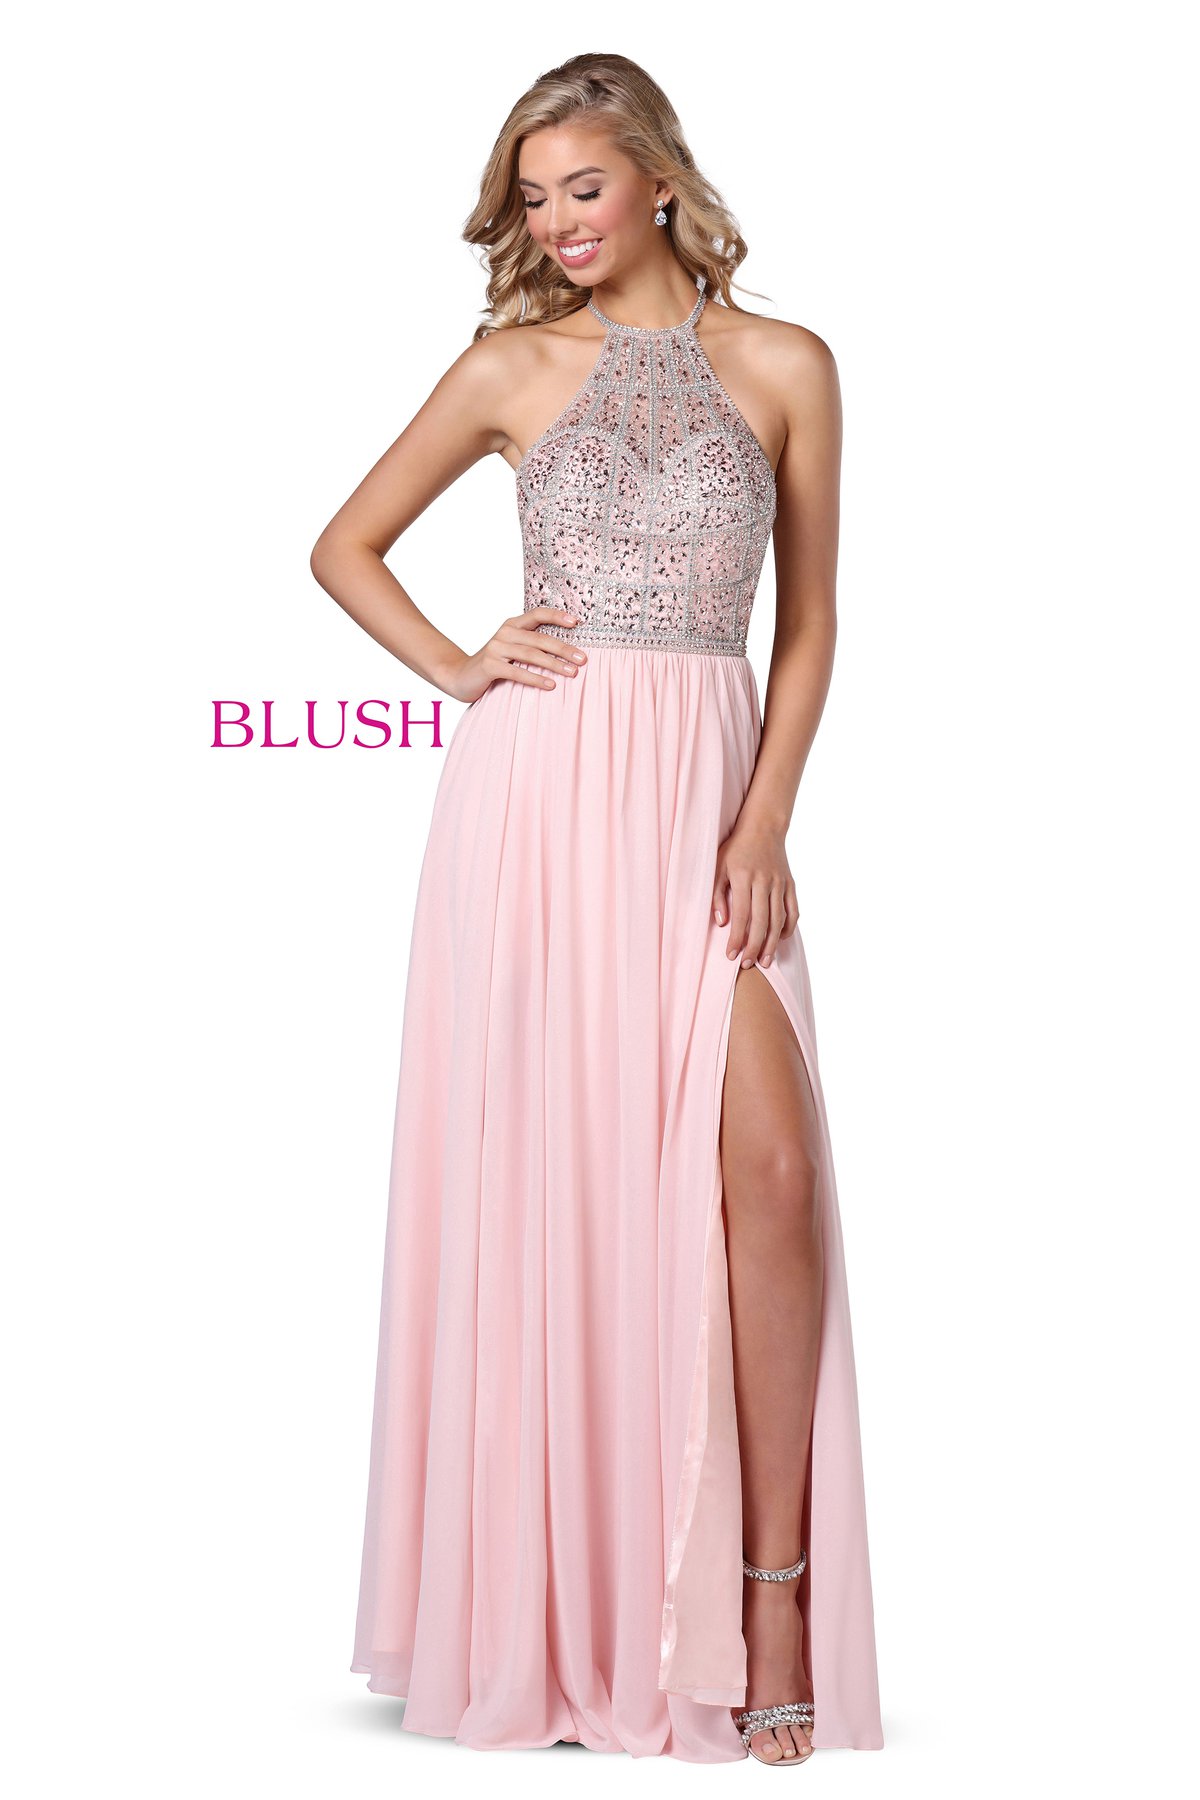 Blush Prom - Prom Dresses and Evening 